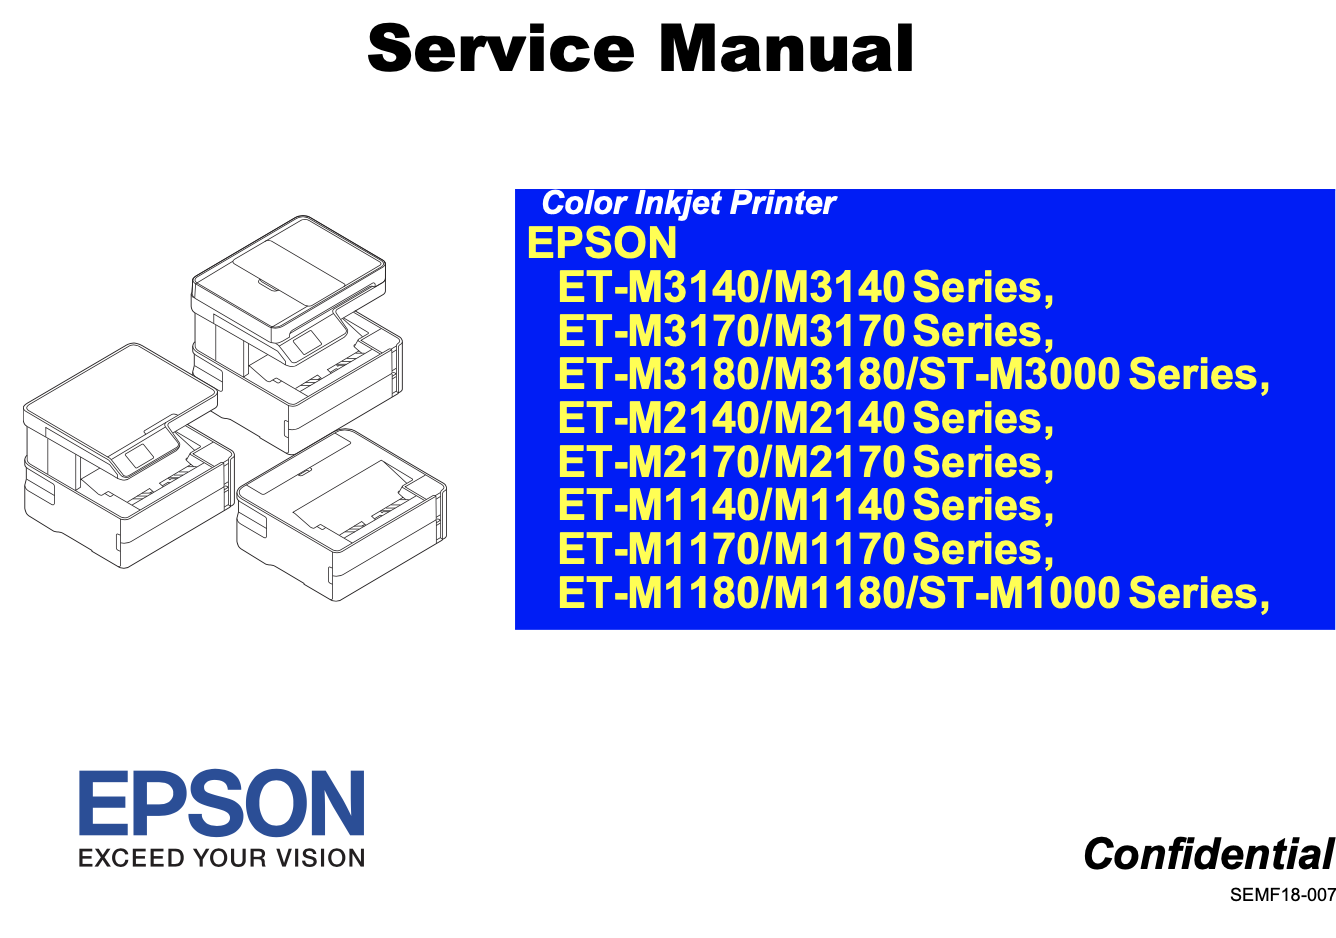 Epson <b>ET-M1140 Series, ET-M1170 Series, ET-M1180 Series,  ET-M2140 Series, ET-M2170 Series, ET-M3140 Series, ET-M3170 Series, ET-M3180 Series, ST-M1000 Series, ST-M3000 Series </b> printers Service Manual  and Exploded View<font color=red>New!</font>